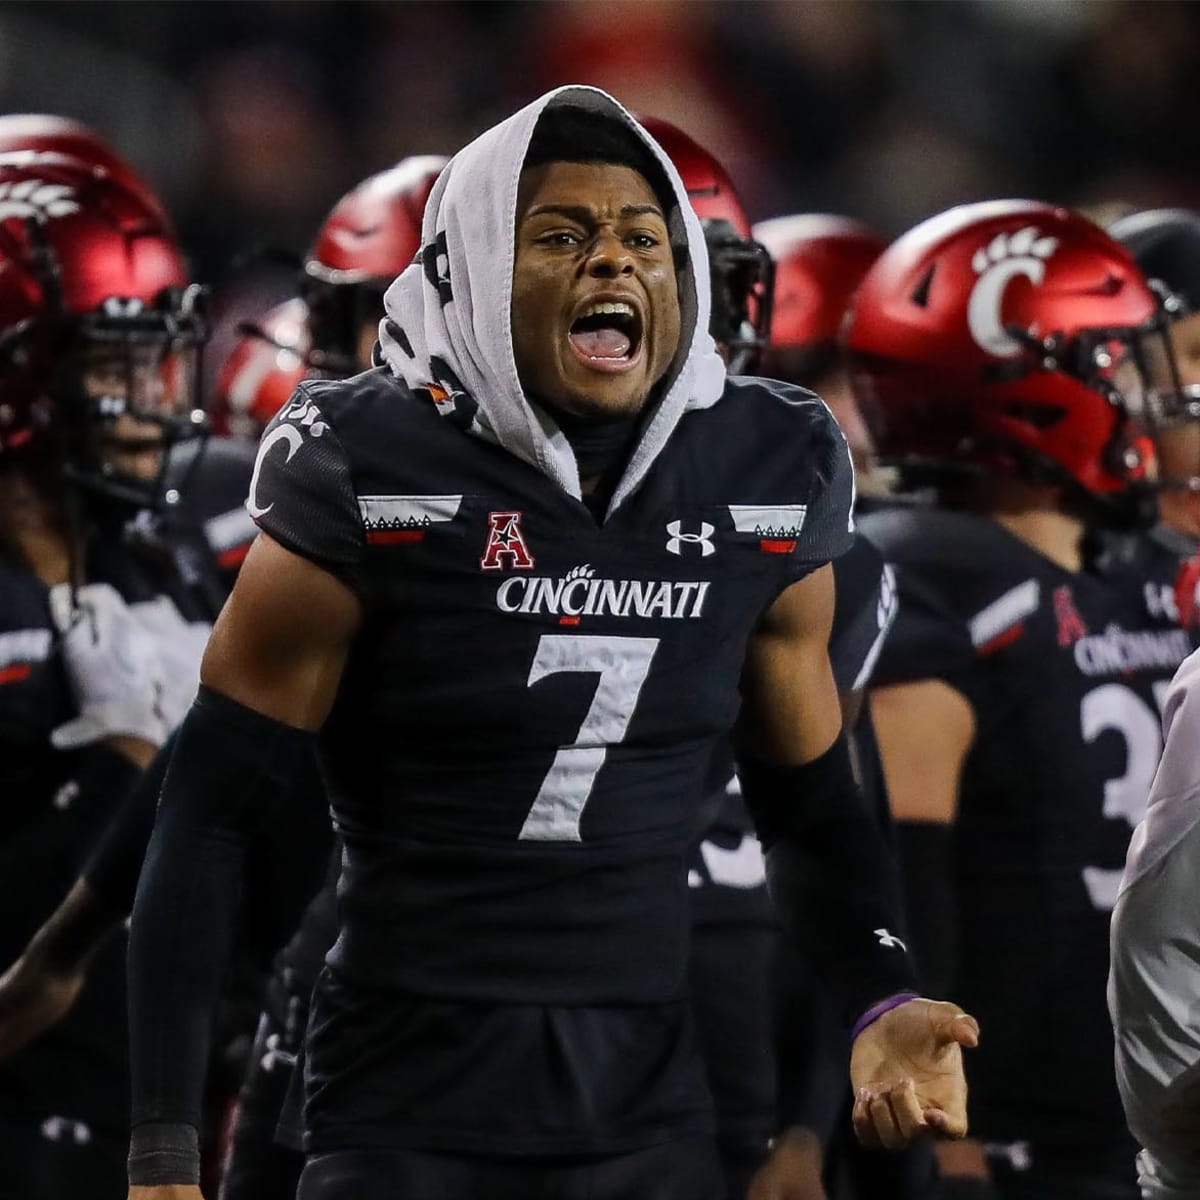 Cincinnati's Coby Bryant to honor Kobe during CFB Playoff semifinal -  Sports Illustrated